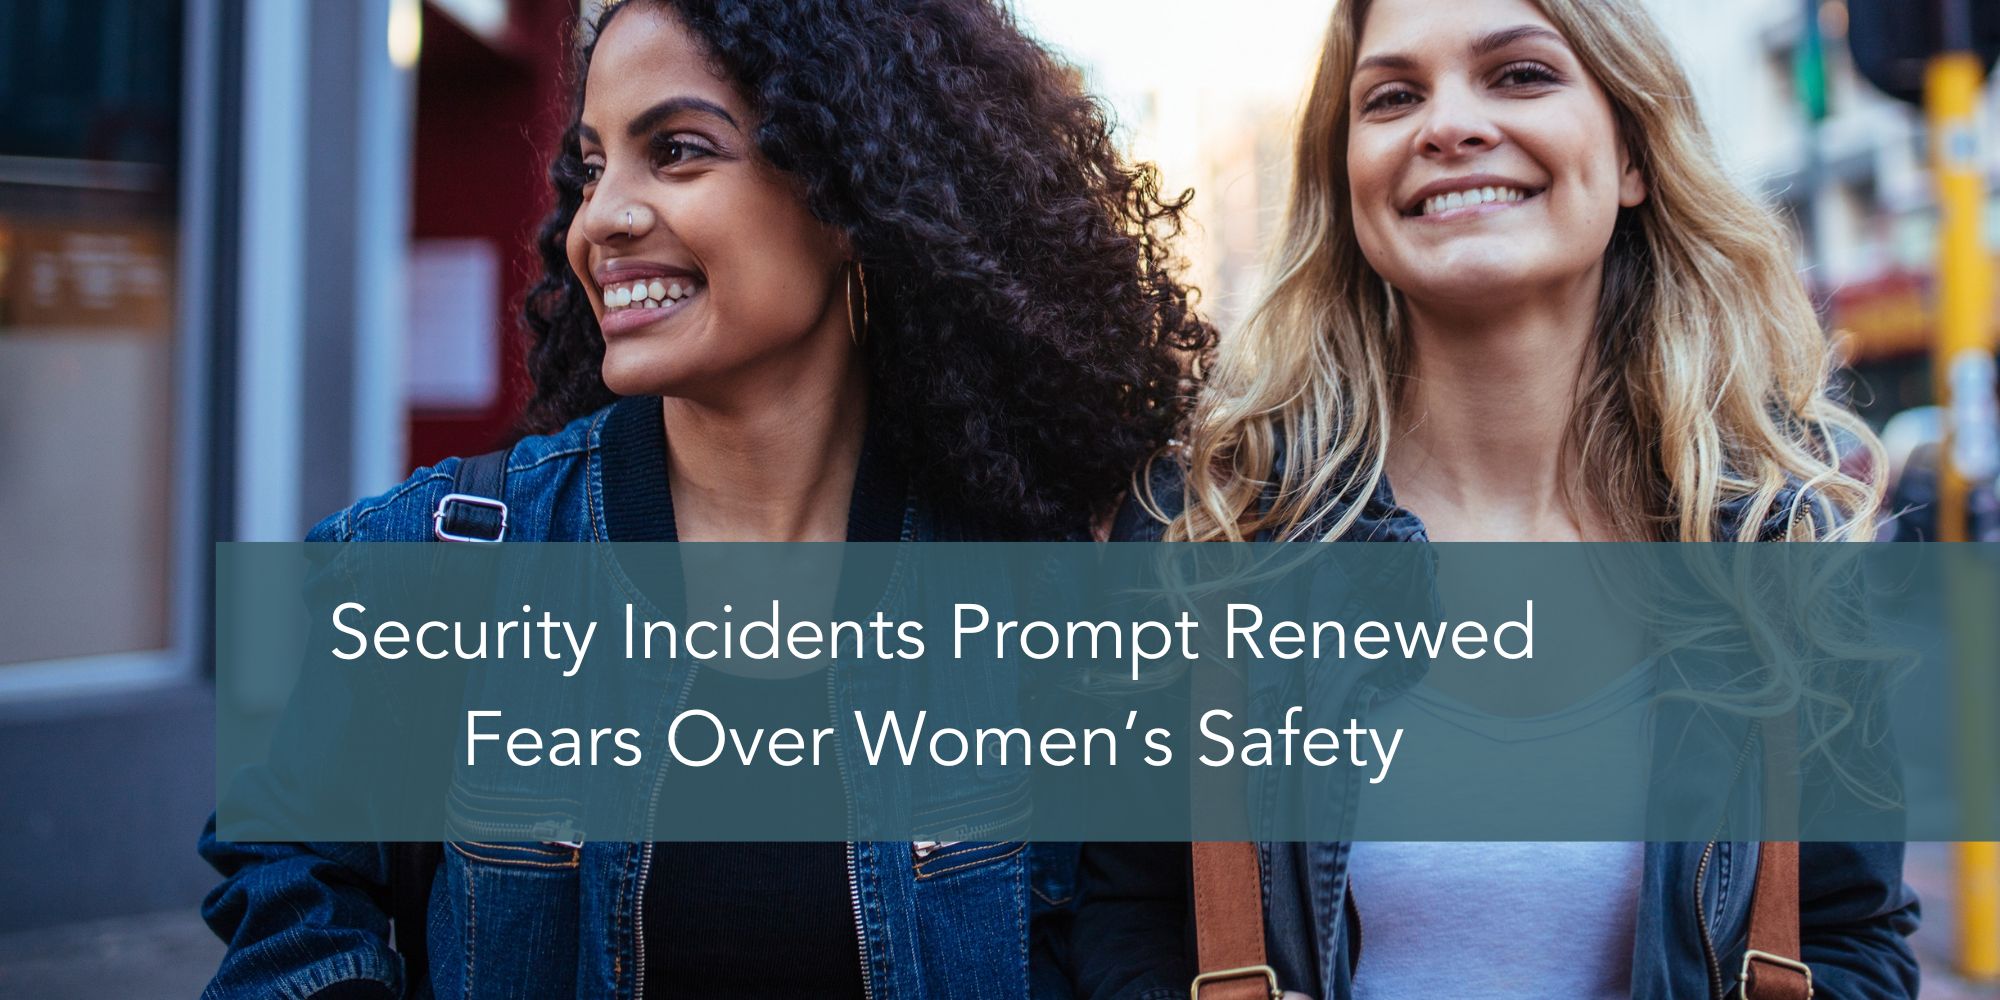 Security Incidents Prompt Renewed Fears Over Women’s Safety